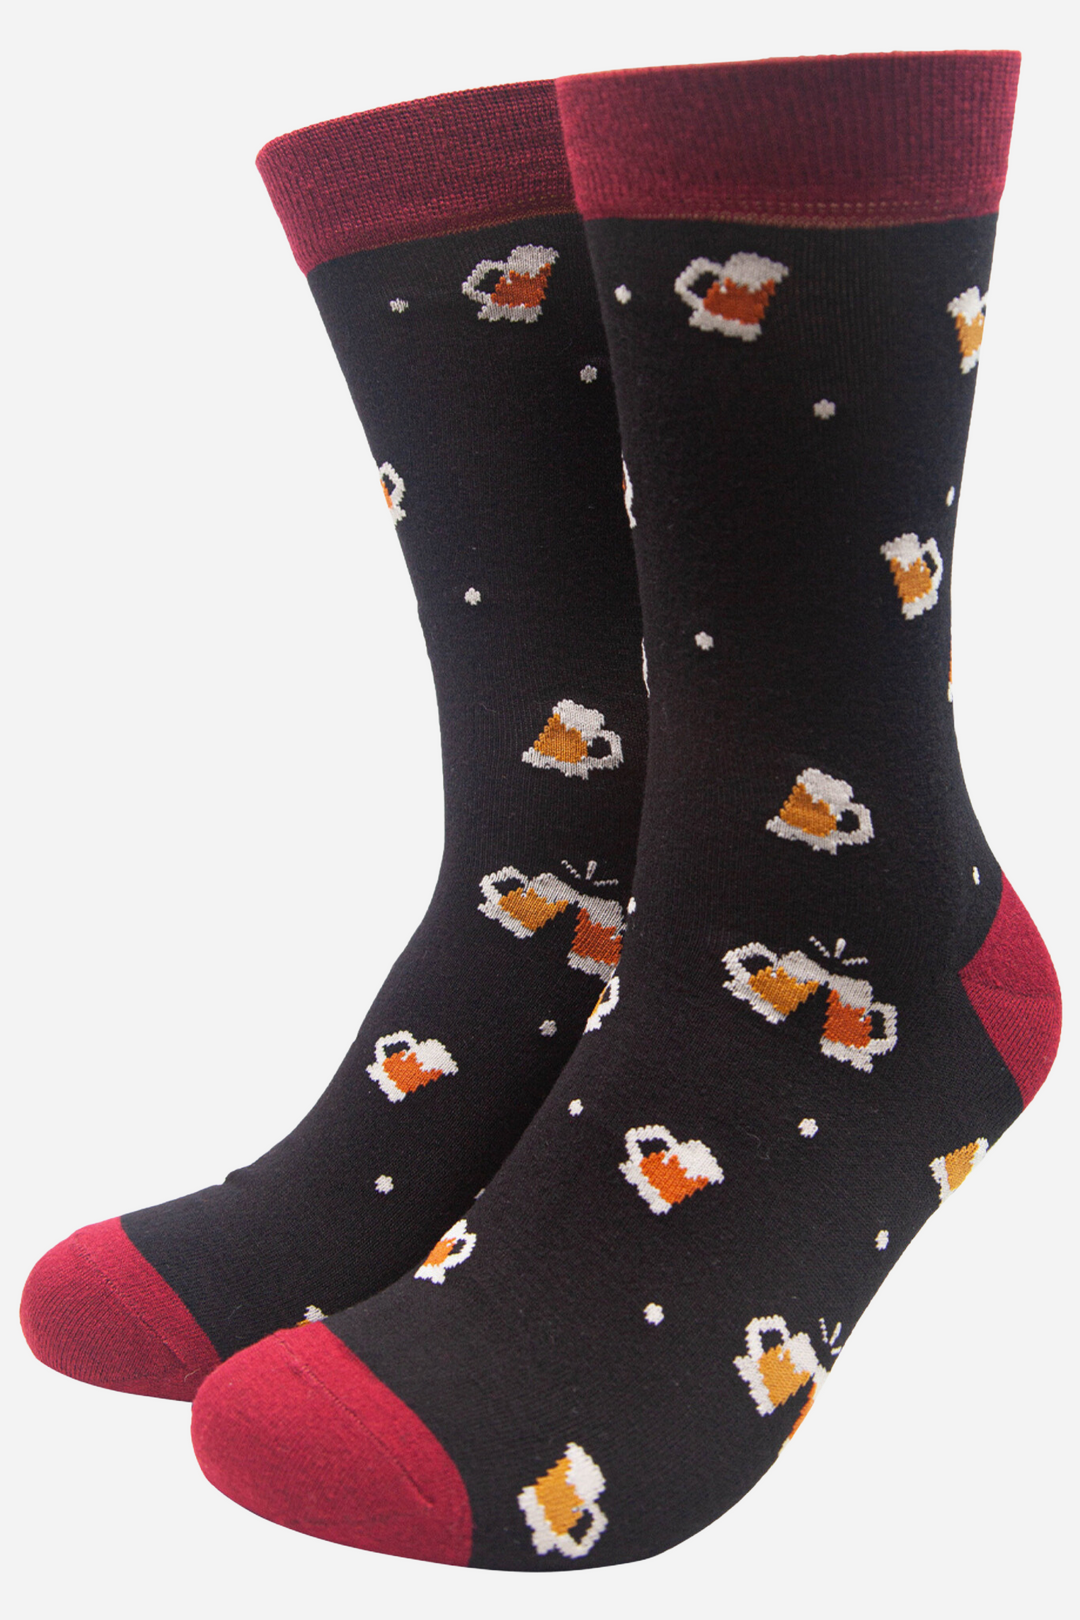 black bamboo socks with red heel, toe and cuff with a pattern of beer mugs all over